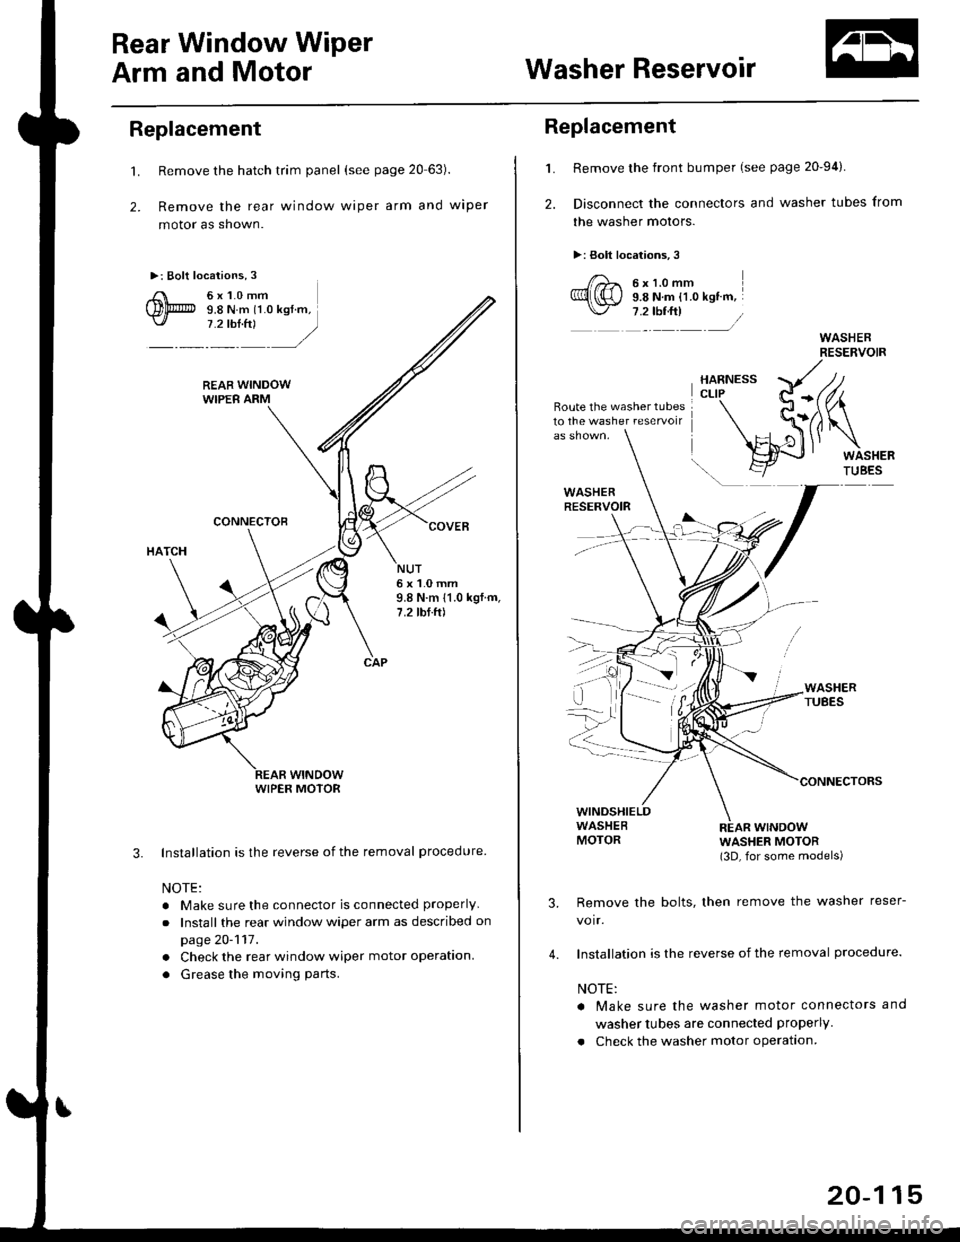 HONDA CIVIC 1998 6.G Workshop Manual Rear Window Wiper
Arm and MotorWasher Reservoir
Replacement
t.
2.
Remove the hatch trim panel (see page 20 63).
Remove the rear window wiper arm and wiper
motor as shown.
Installation is the reverse 